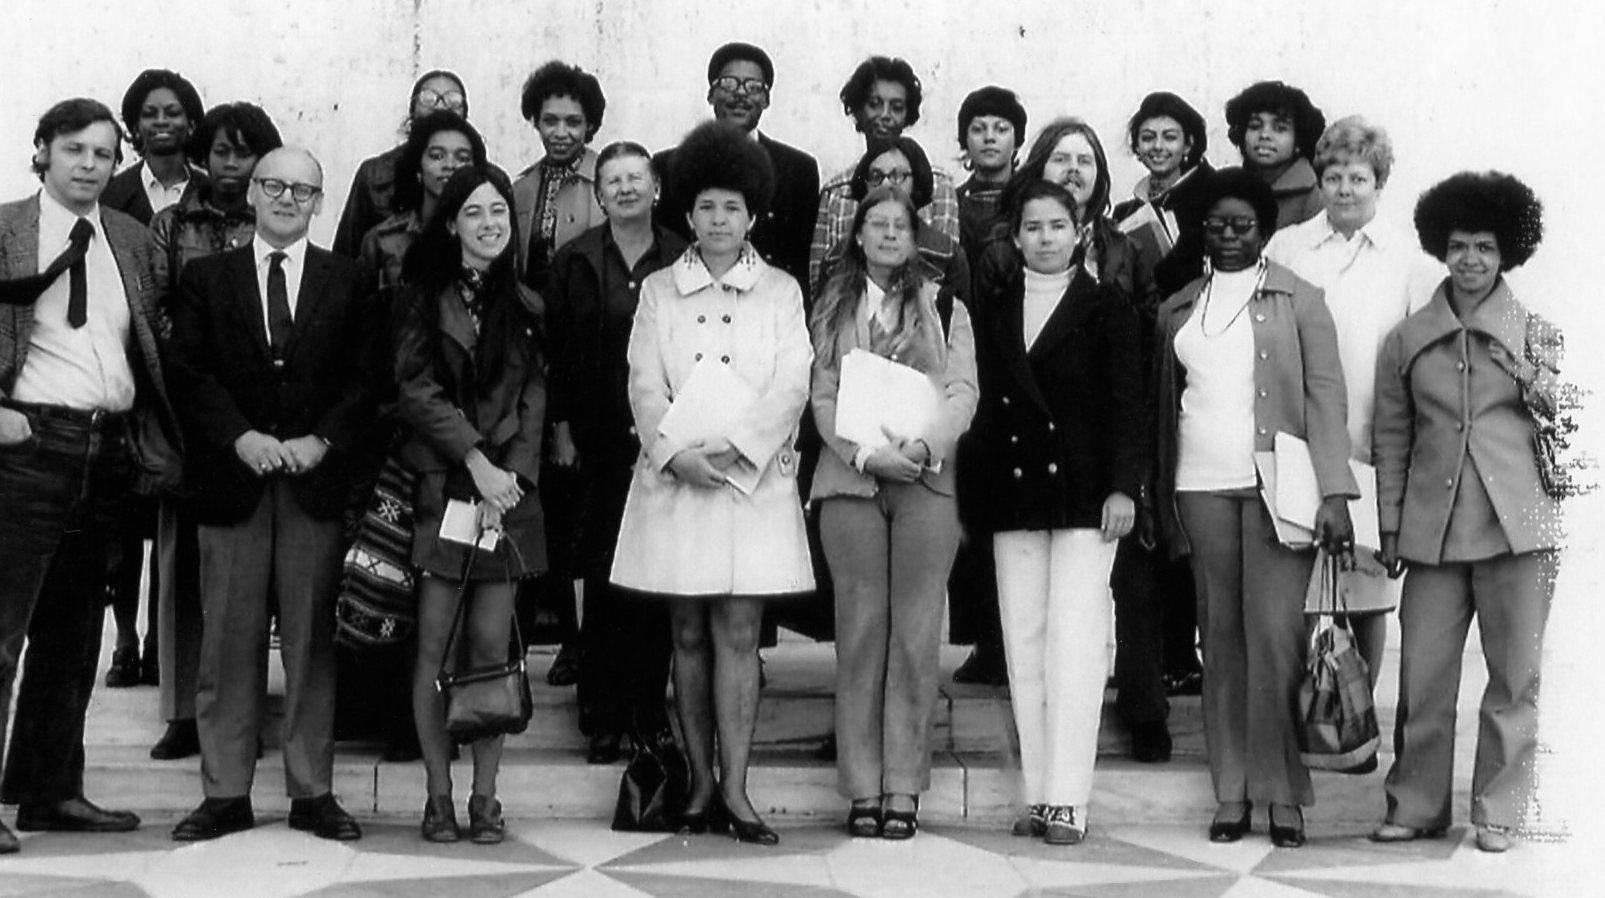 A black and white photo circa 1972 of the program cohort and its directors.